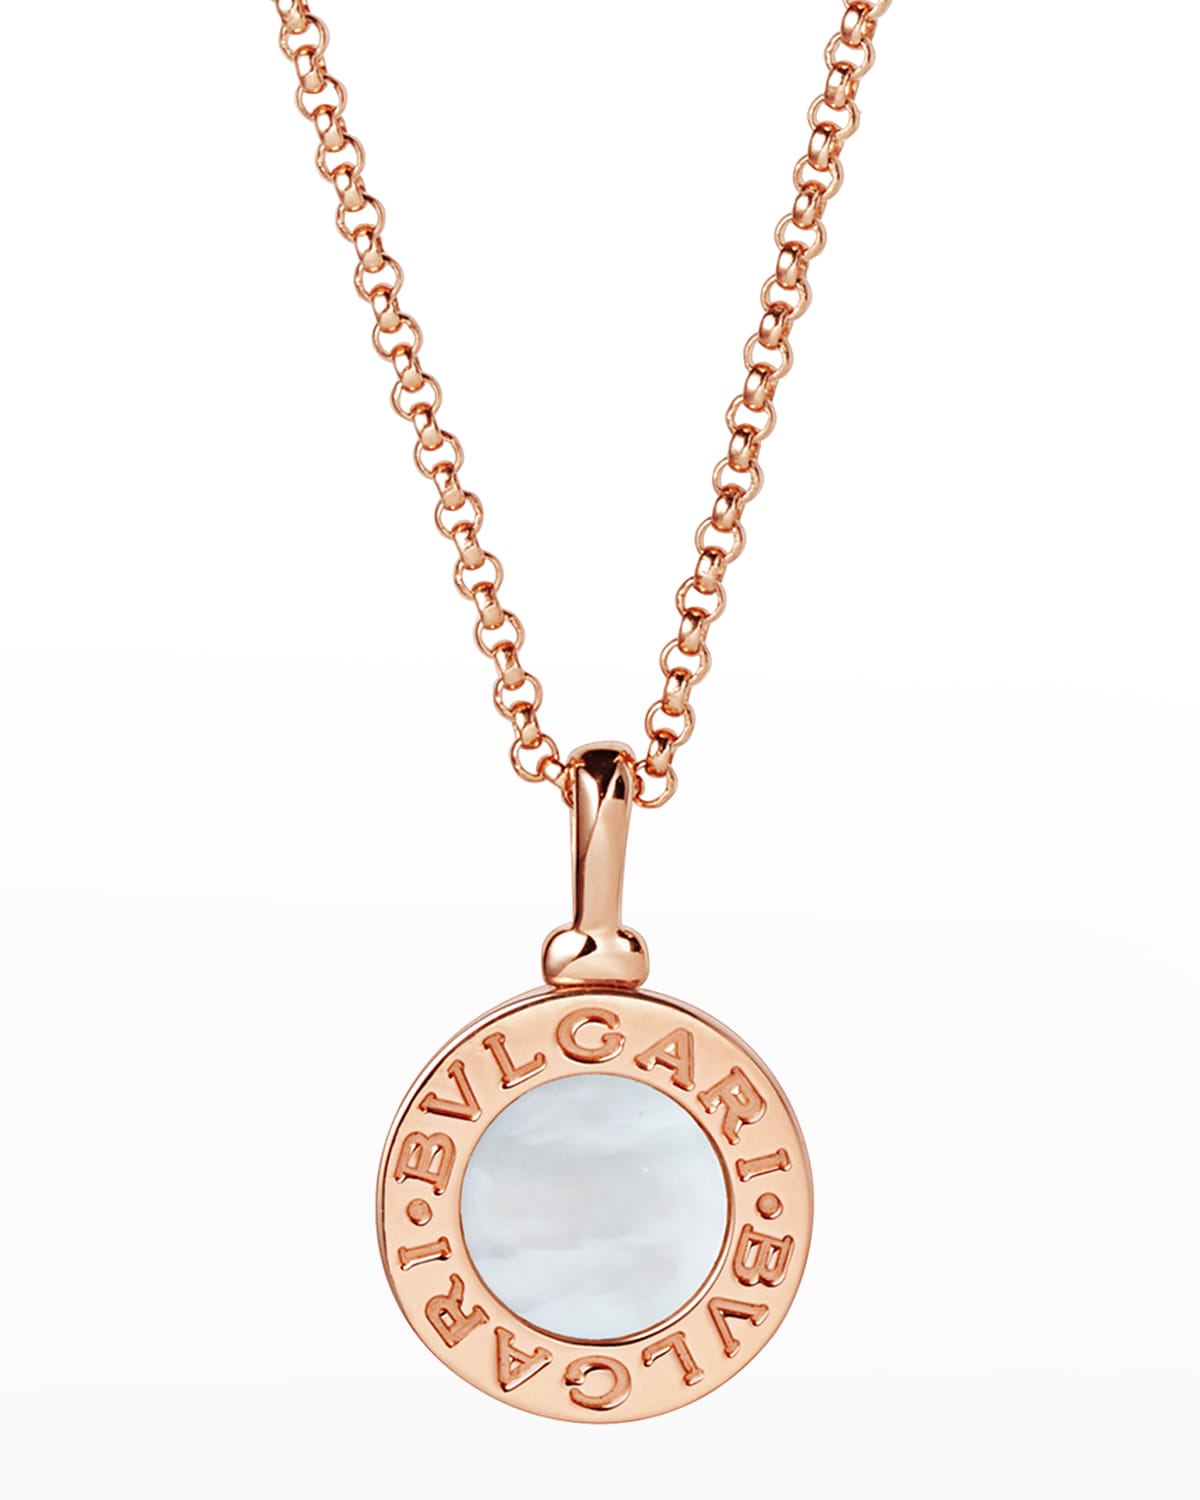 BVLGARI BVLGARI Necklace with Mother-of-Pearl